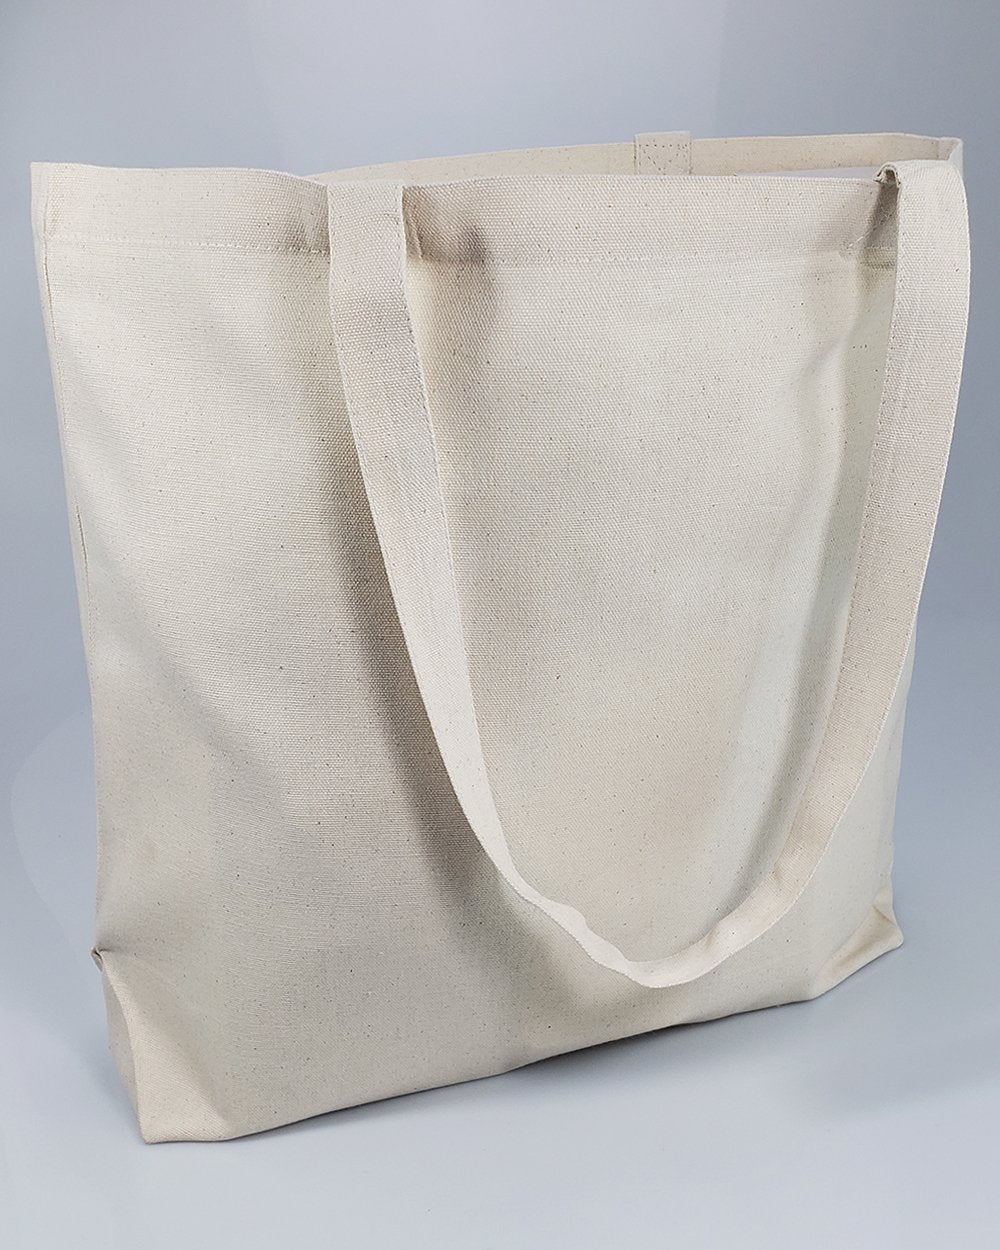 Zipper Canvas Tote Bags Wholesale with Front Pocket - Large | eBay